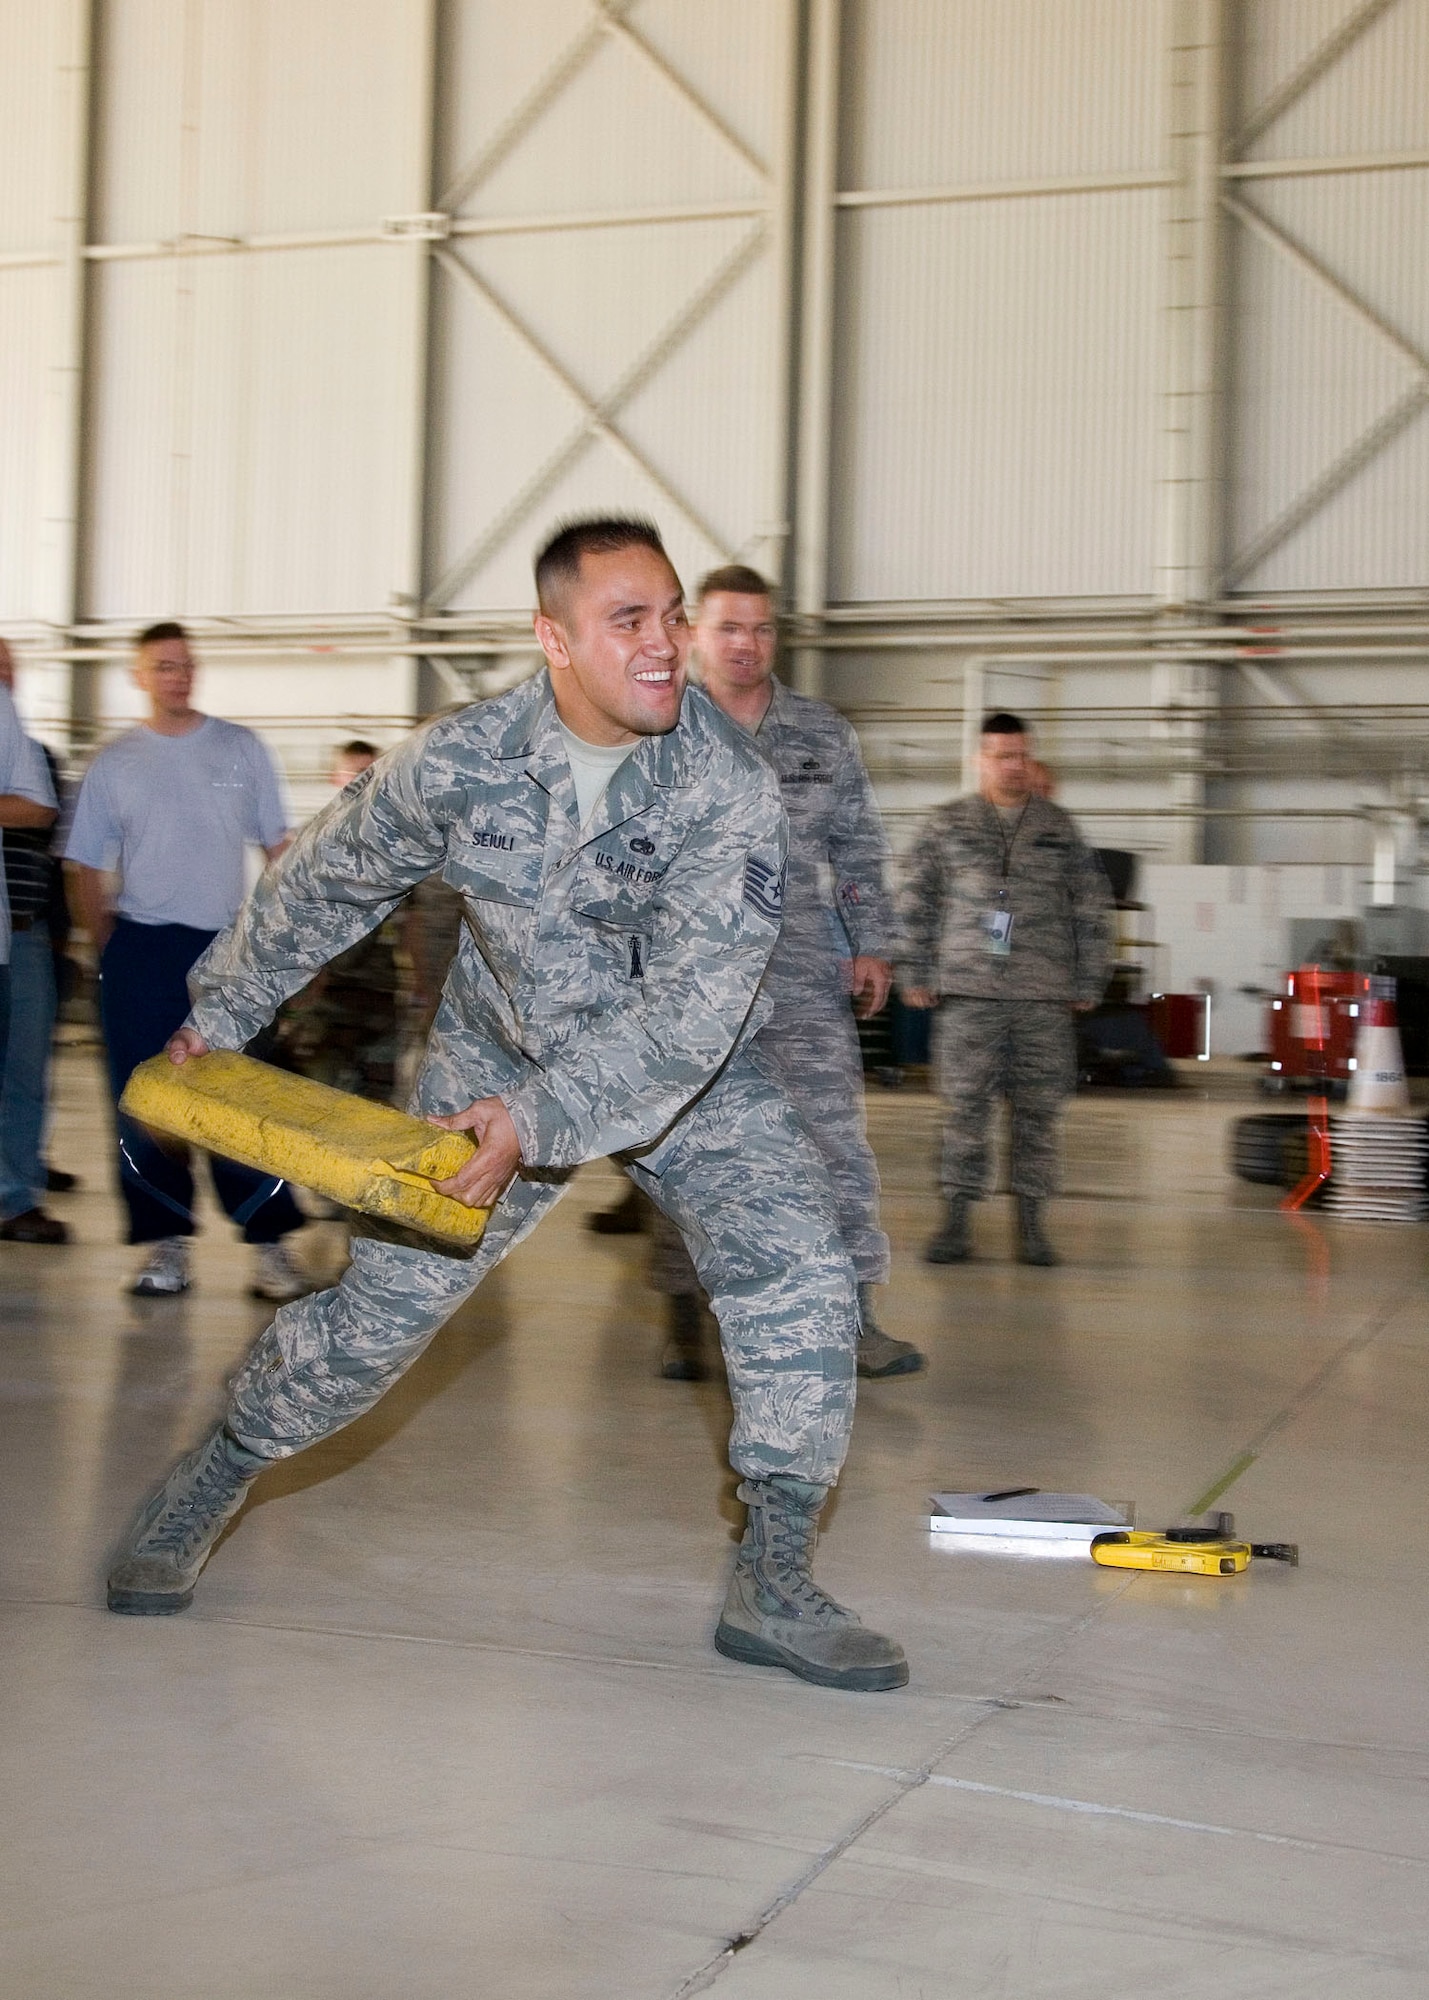 Tech. Sgt. Joseph Seiuli, 412th Maintenance Group aircraft armament systems specialist, tosses a chock as part of the 412th MXG's first Maintenance Olympics at hangar 1600 Nov. 7. Airmen and civilians from the 412th MXG and 31st Test and Evaluation Squadron participated in the event. (Air Force photo by Chad Bellay)